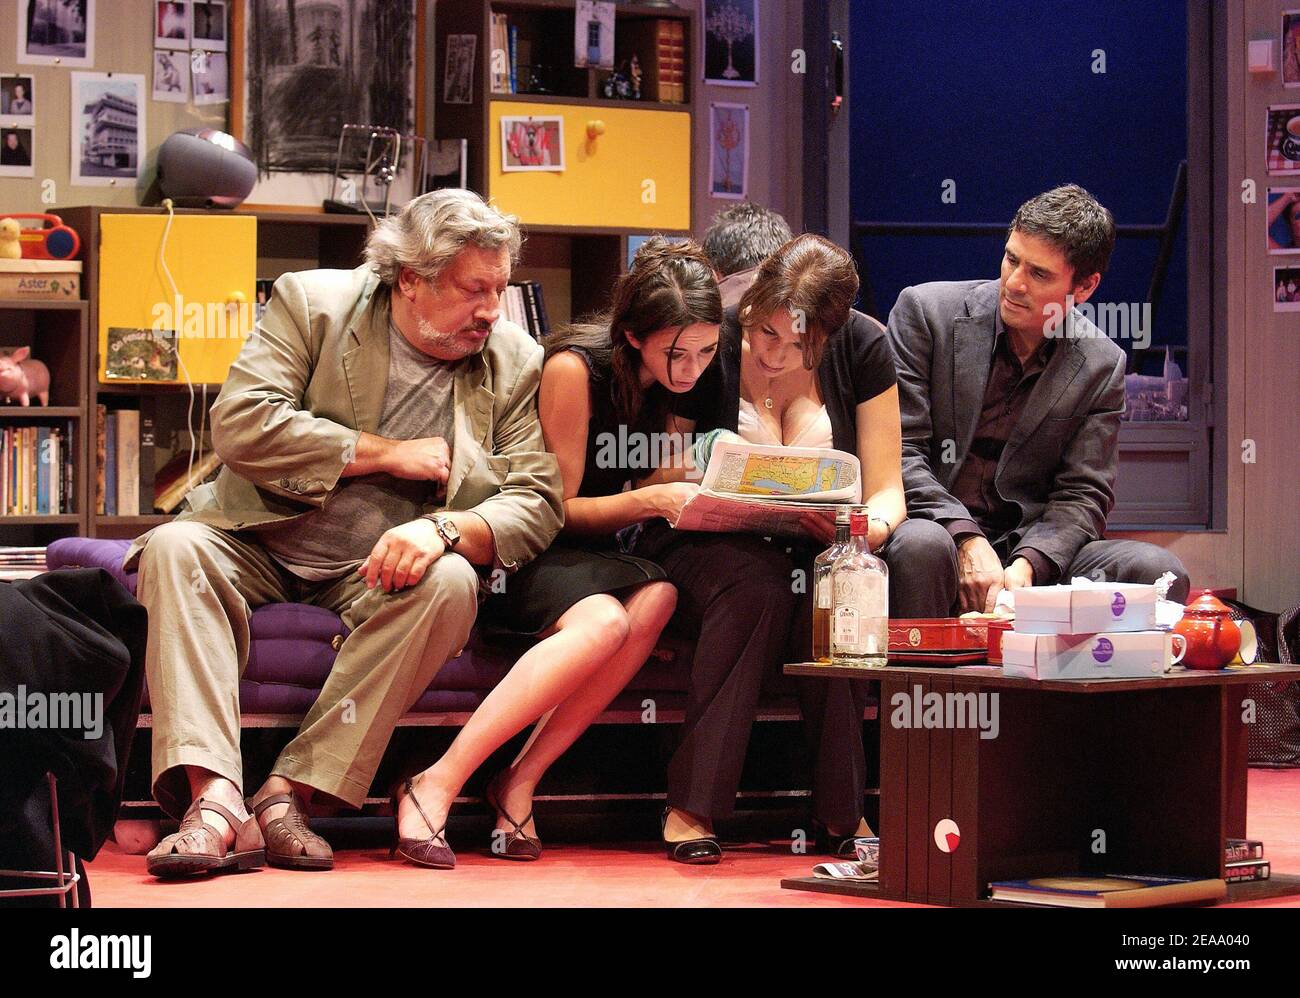 L to R) French actors and cast members Jean-Claude Dreyfus, Maud Le  Grevellec, Valerie Benguigui, Pascal Elbe on stage for the run through of  the play 'Pour ceux qui restent' written by